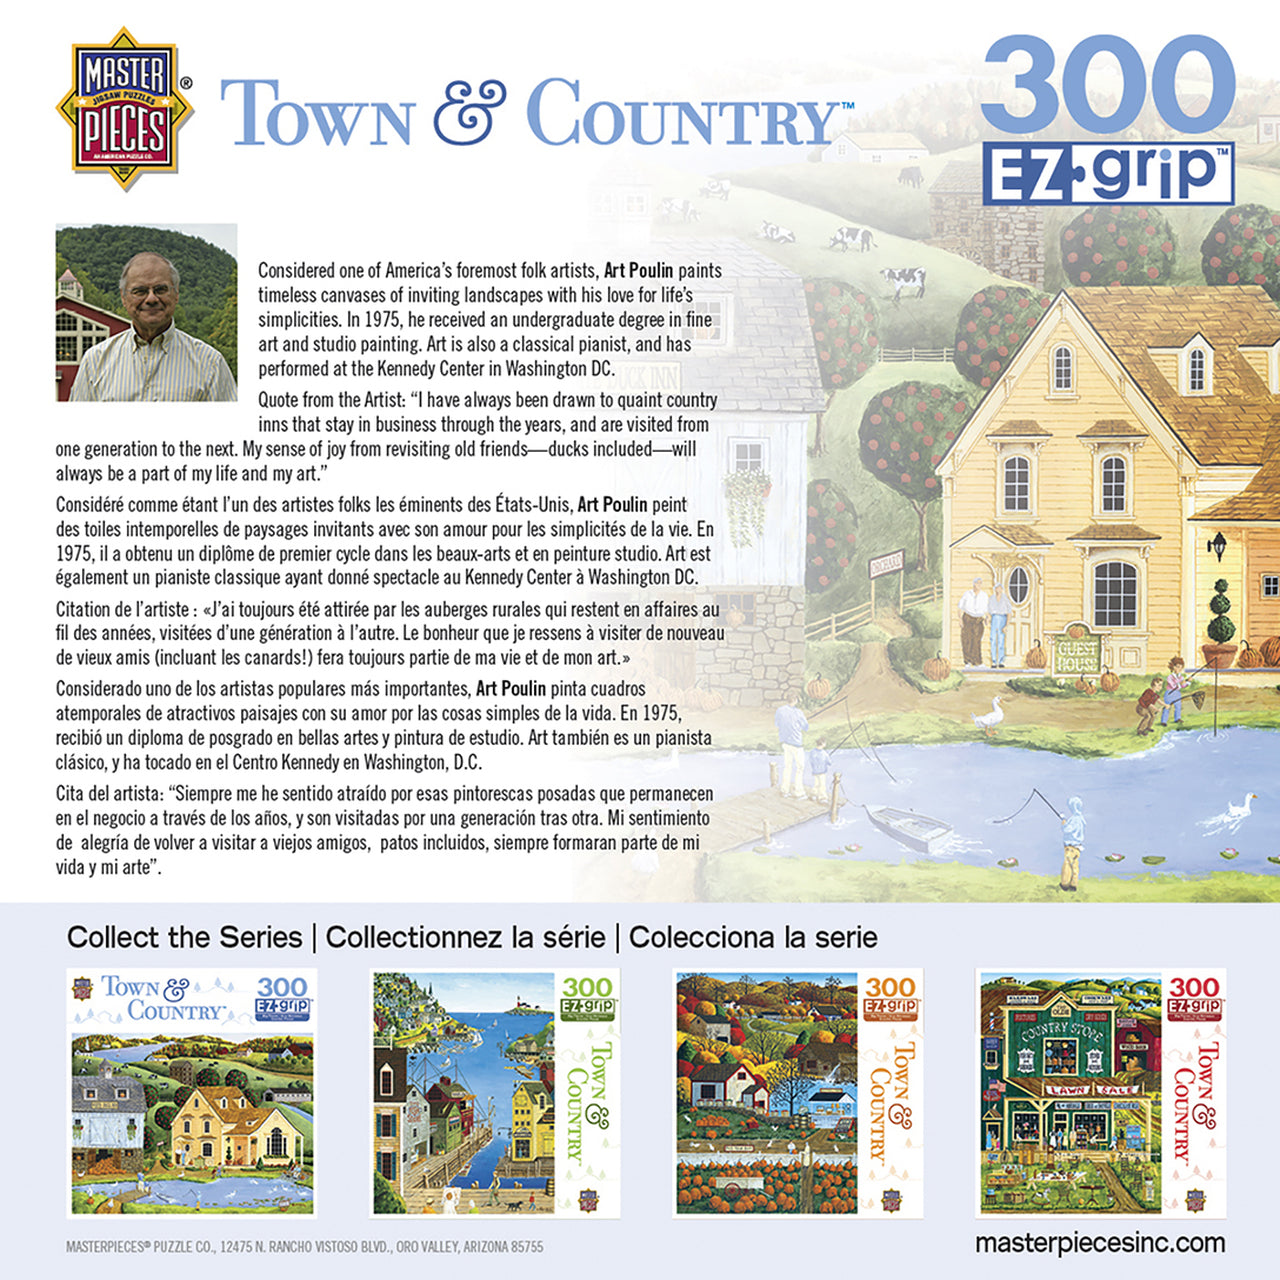 Town & Country The White Duck Inn - Large 300 Piece EZGrip Jigsaw Puzzle by Masterpieces